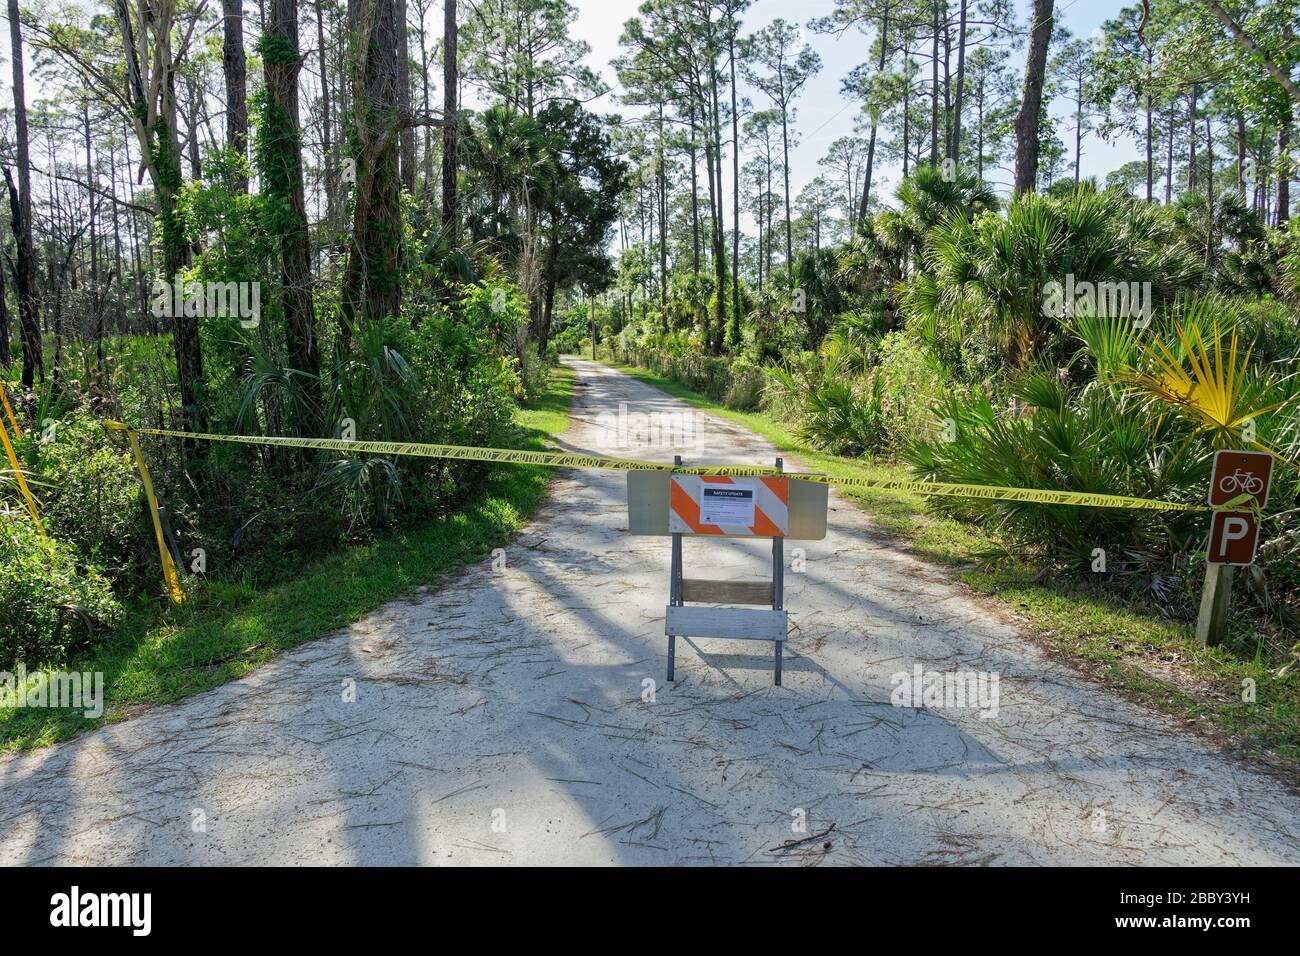 APRIL 1, 2020, CRYSTAL RIVER, FL: Barricades with signs reading 'Park Closed' due to COVID-19 bar access to Florida state parks until further notice. Stock Photo